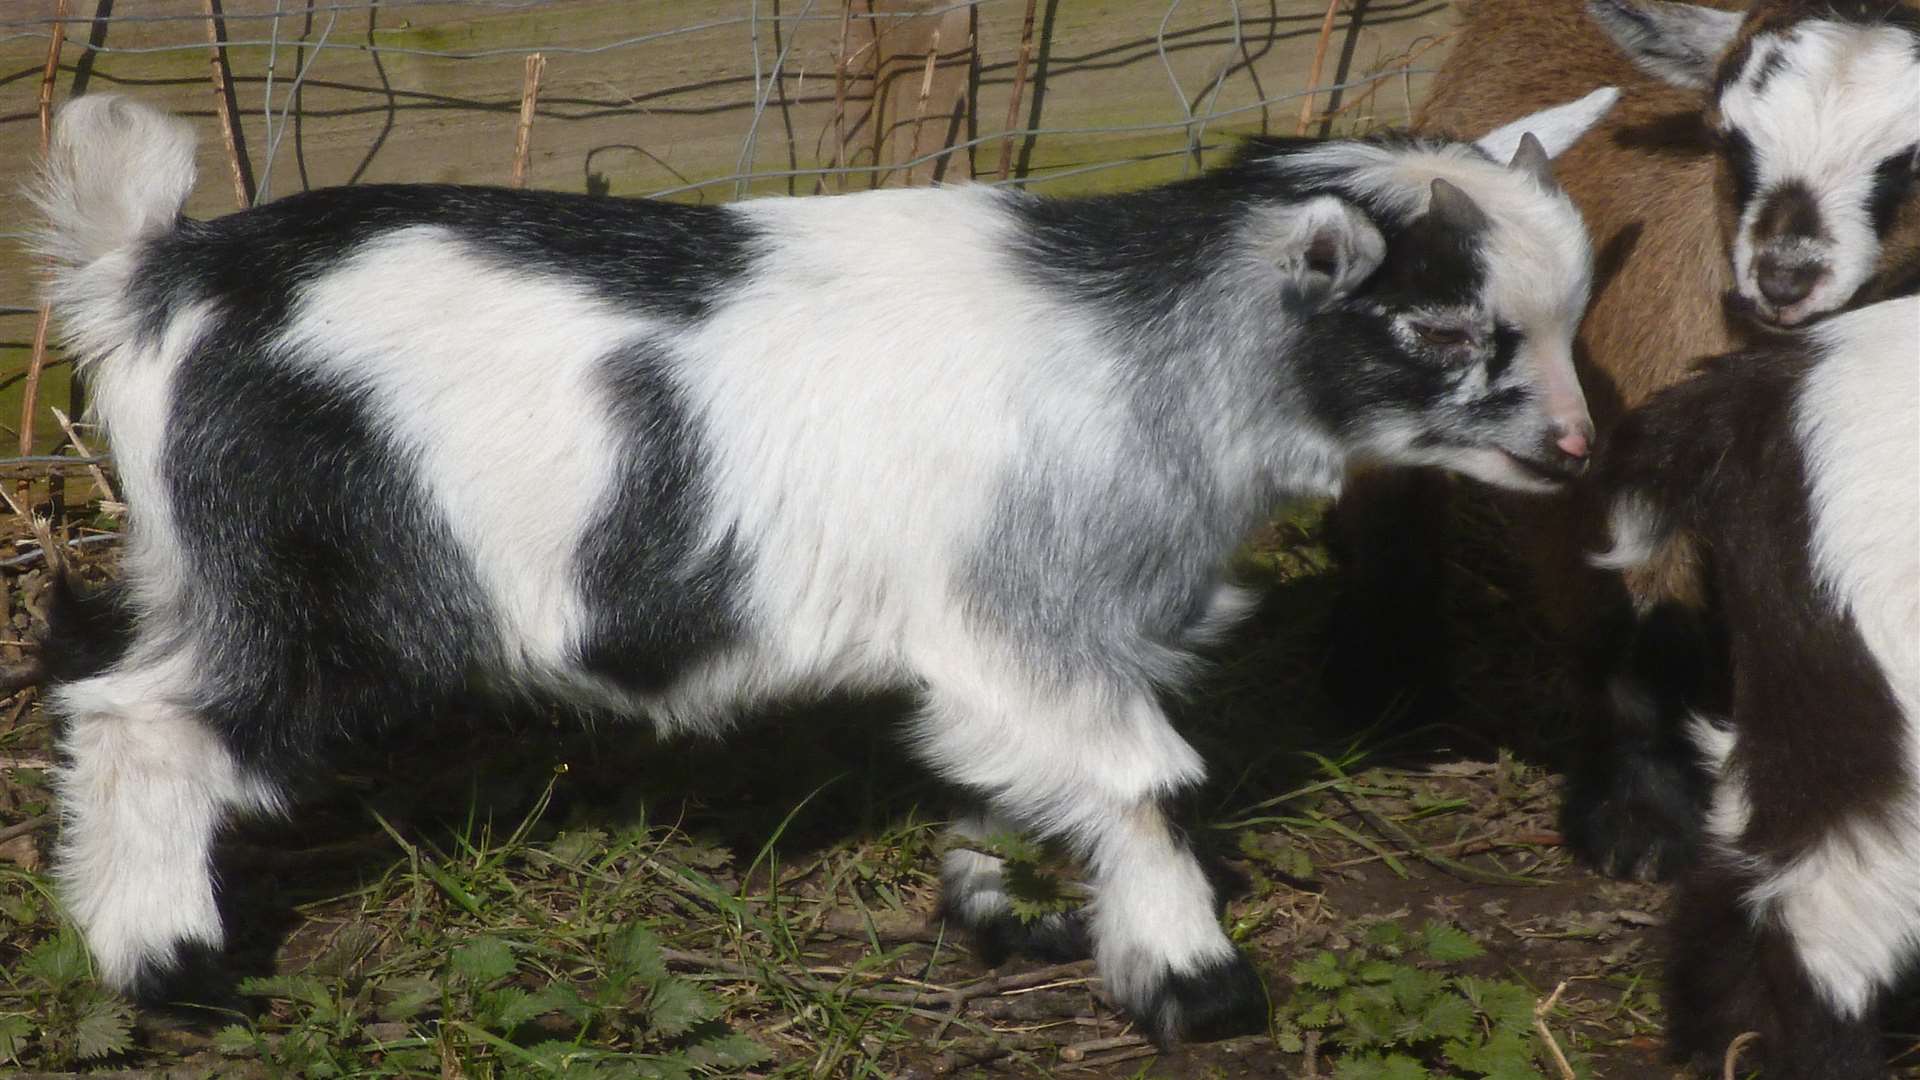 Police are searching for the missing pygmy goats